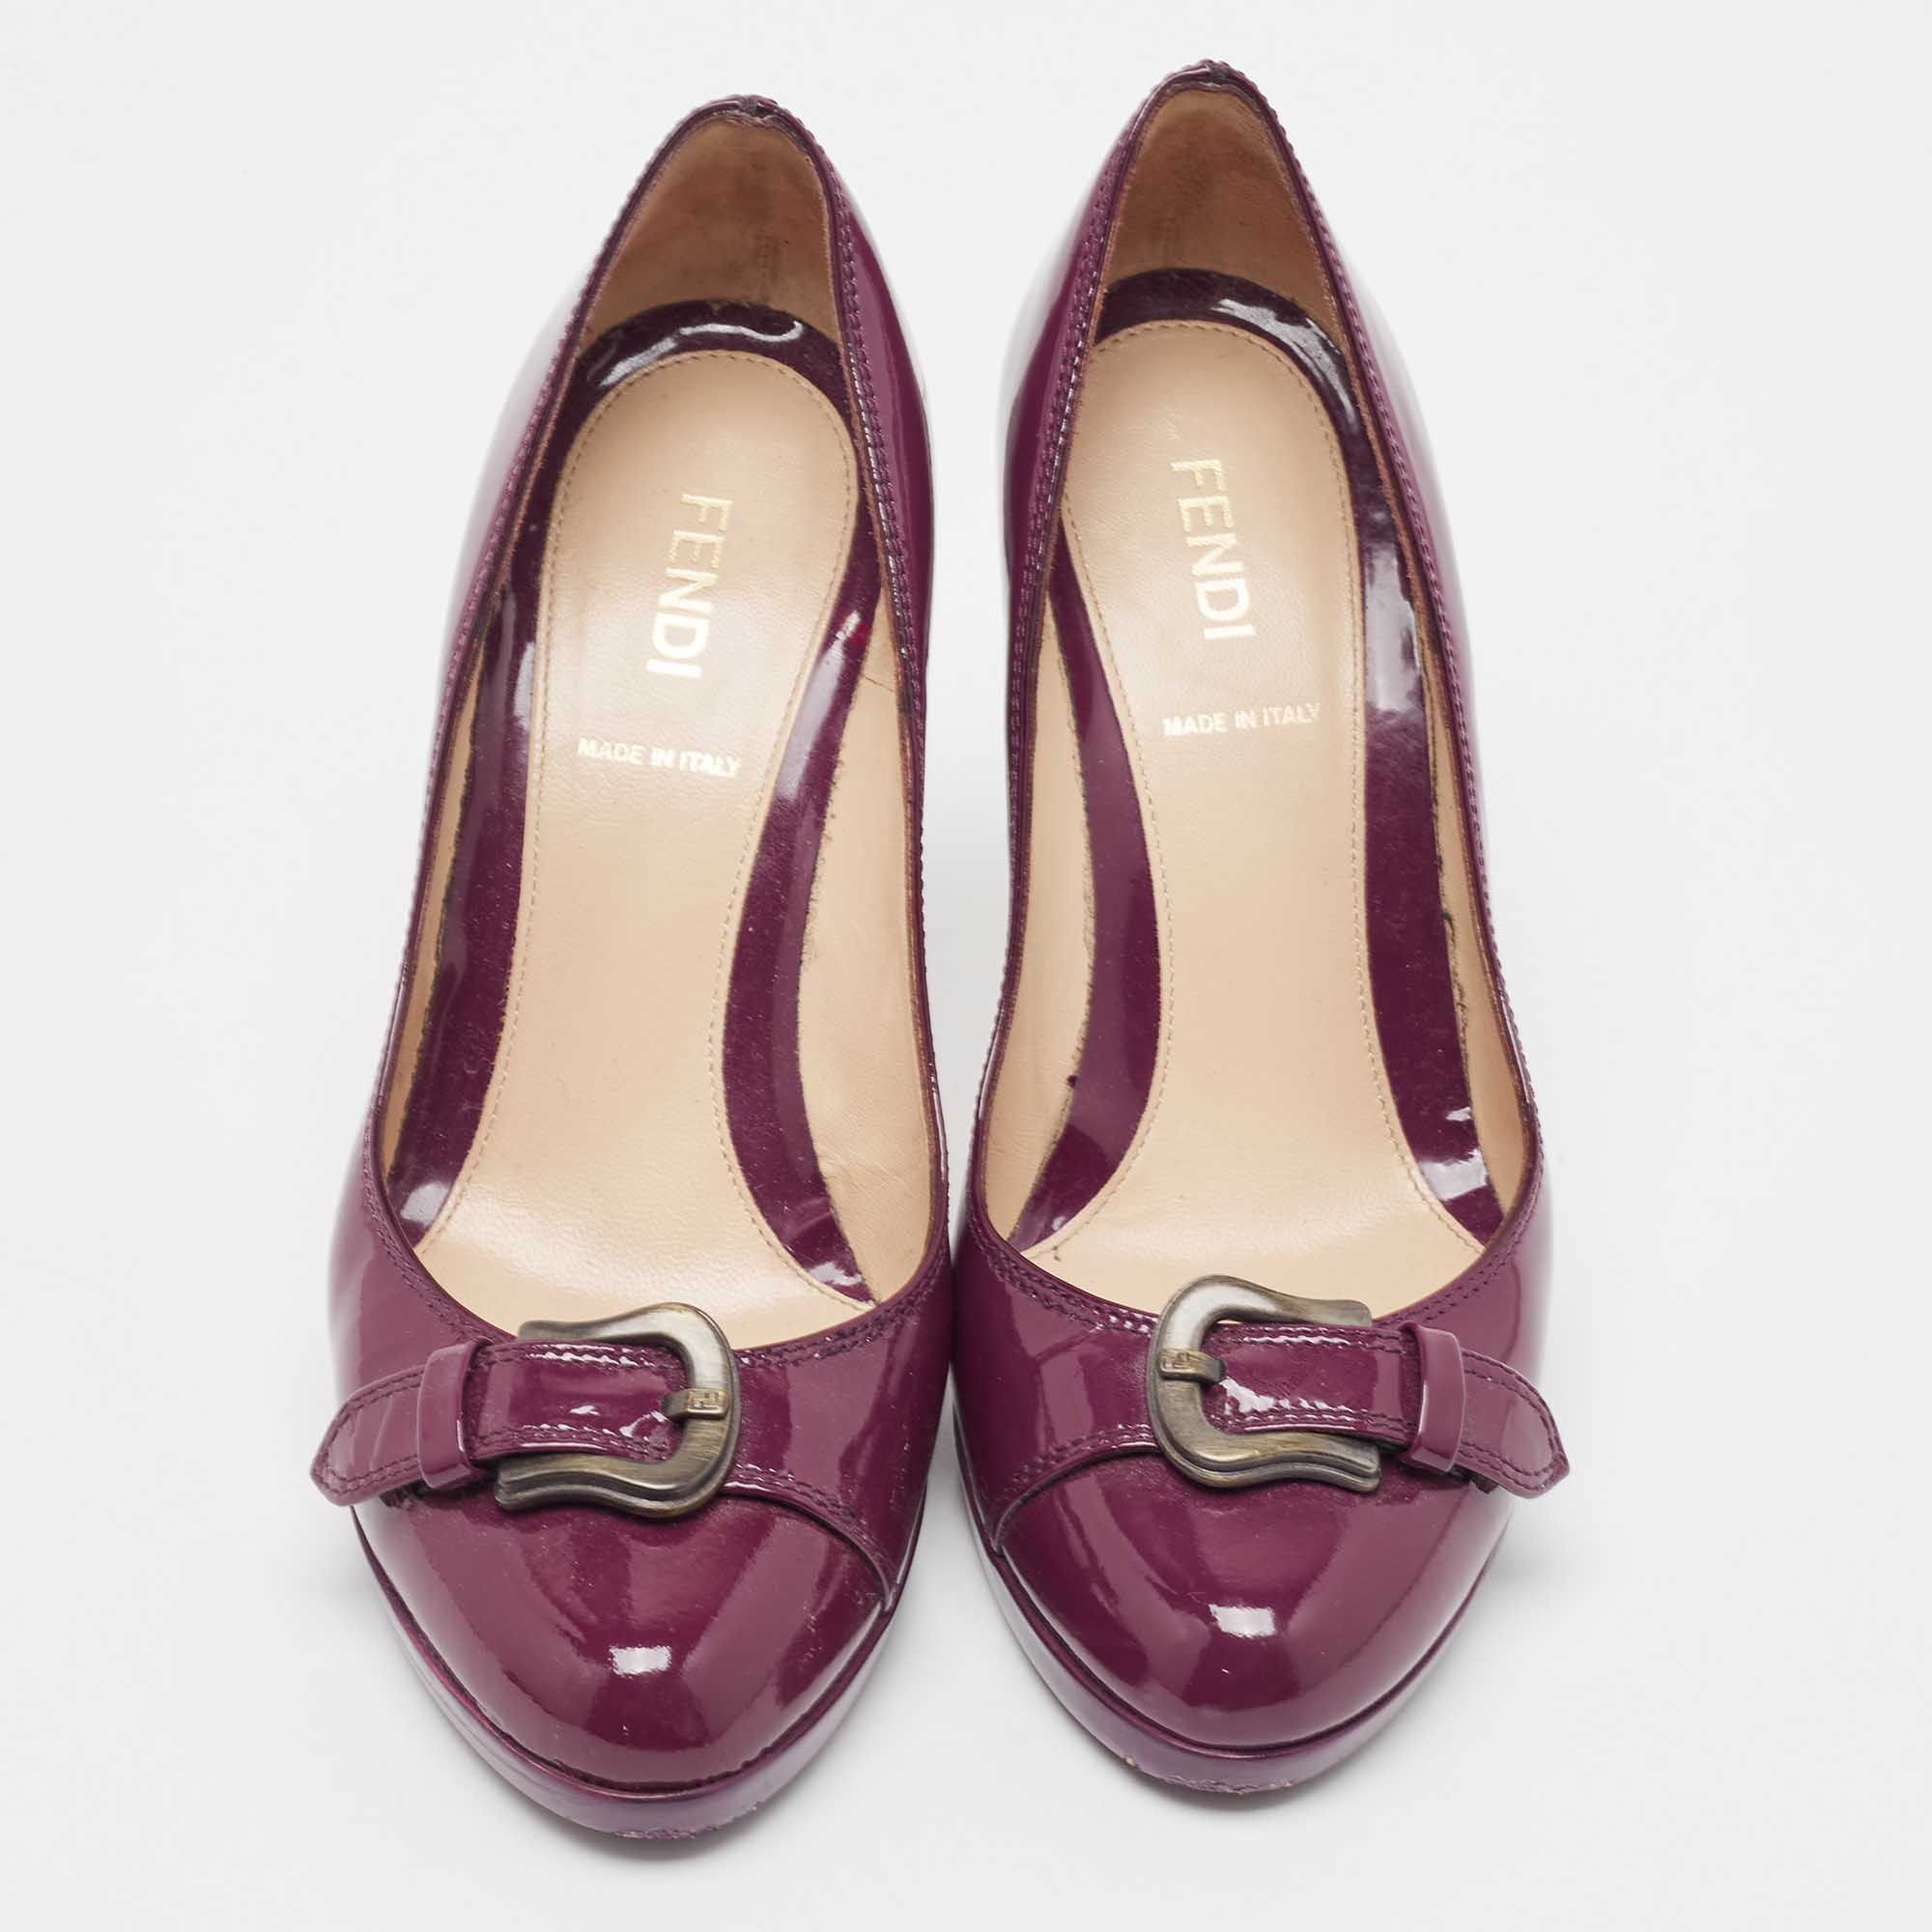 Fendi Burgundy Patent Leather Buckle Detail  Round Toe Pumps Size 36.5